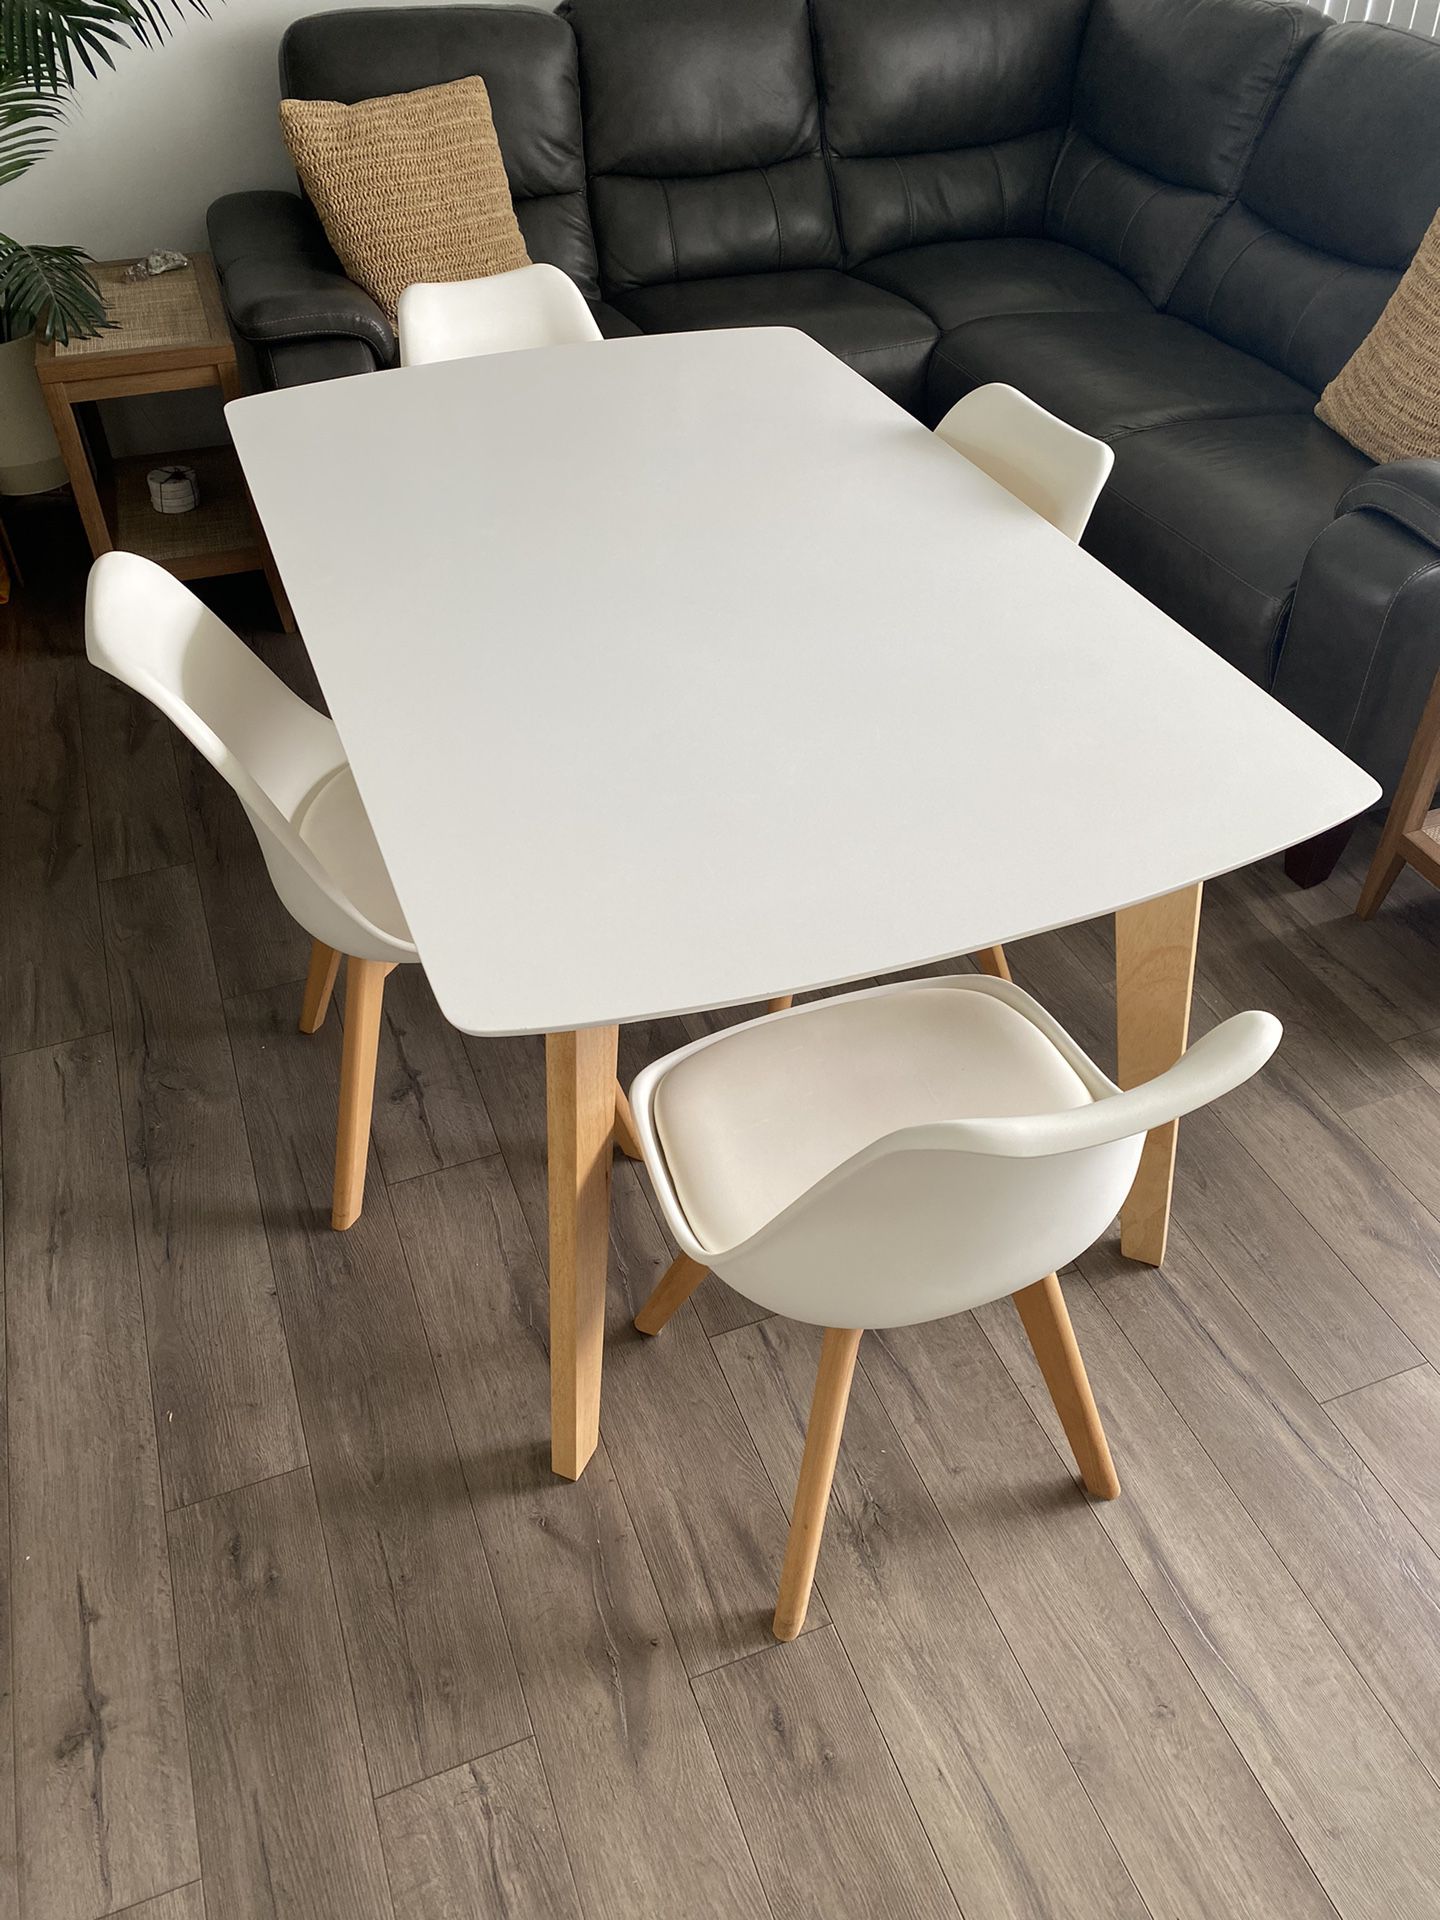 Celine Chairs & Modern Dining table set